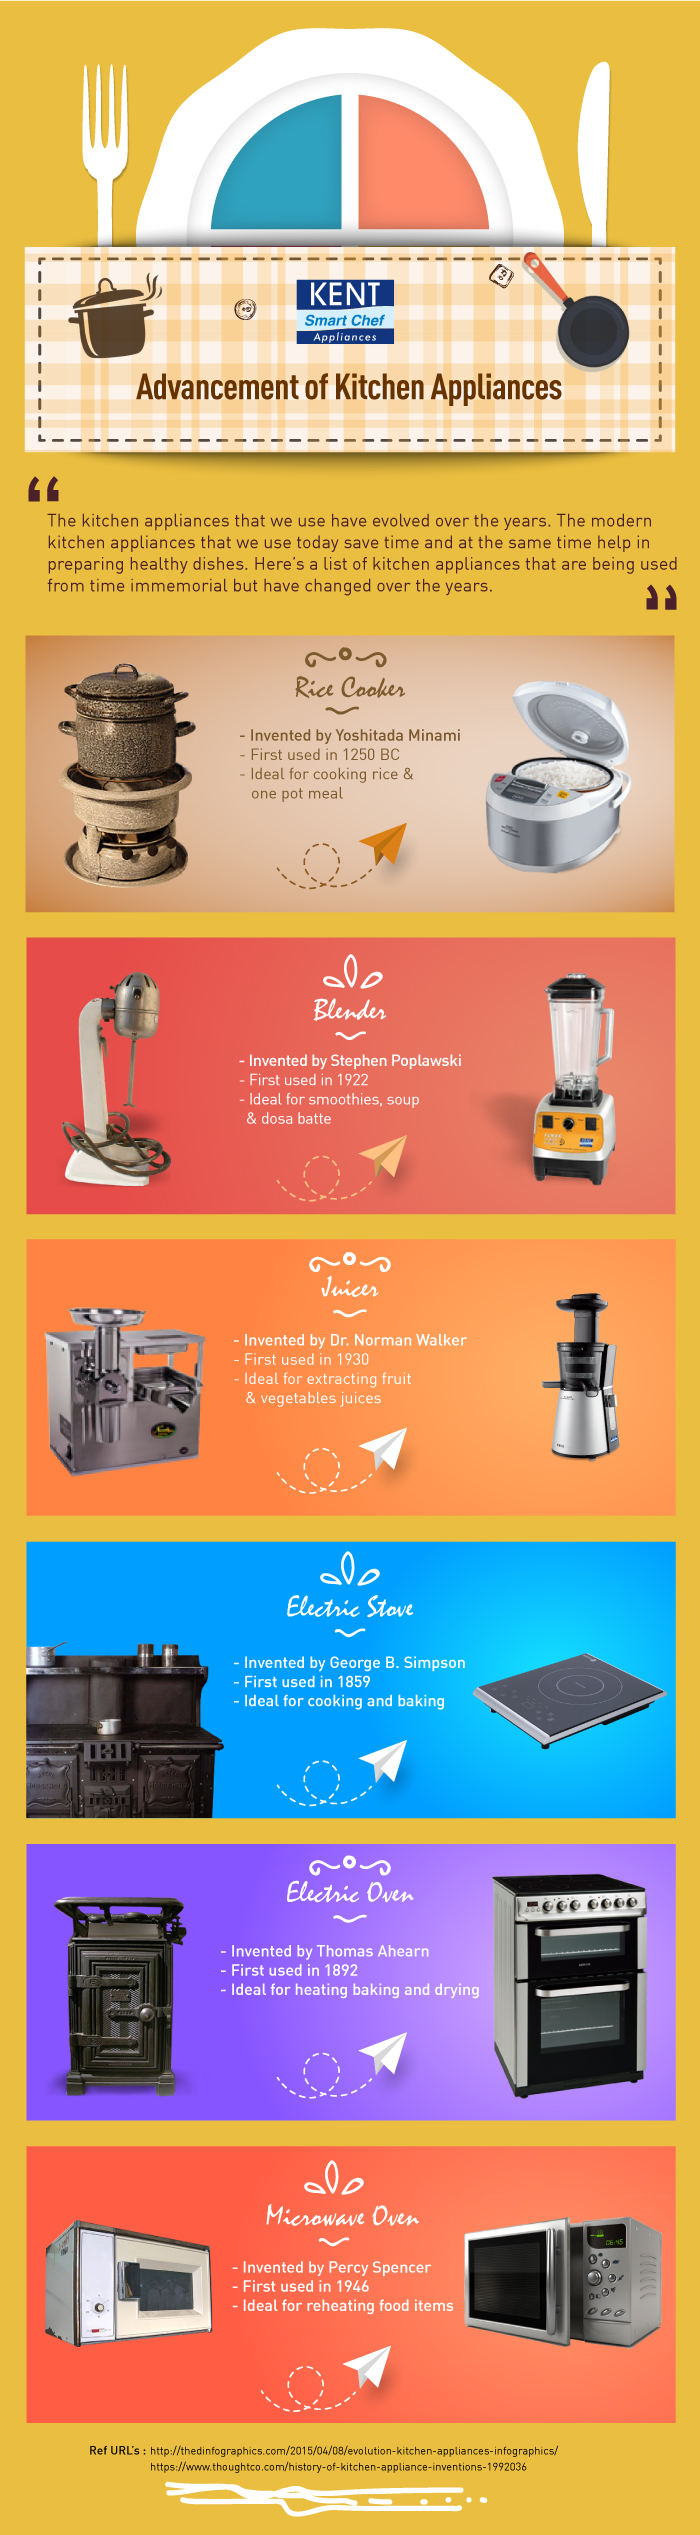 The Benefits of Home Appliances